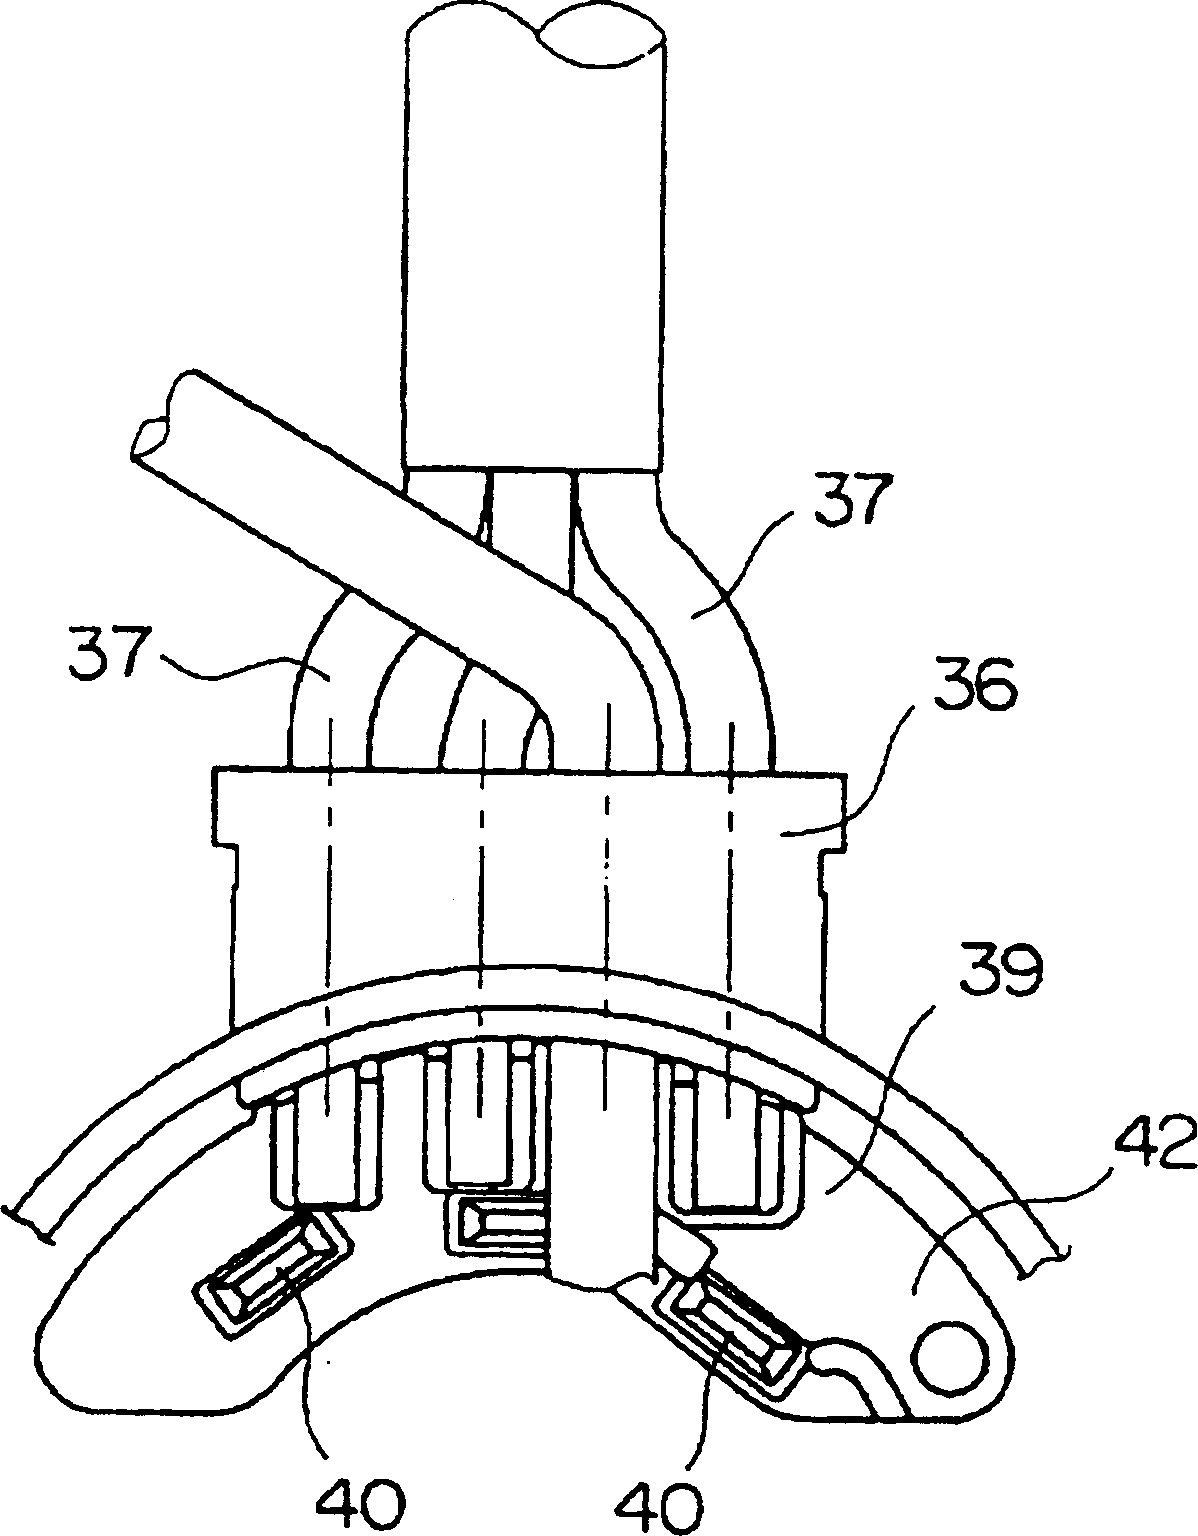 Electric machine for electrodynamic steering gear